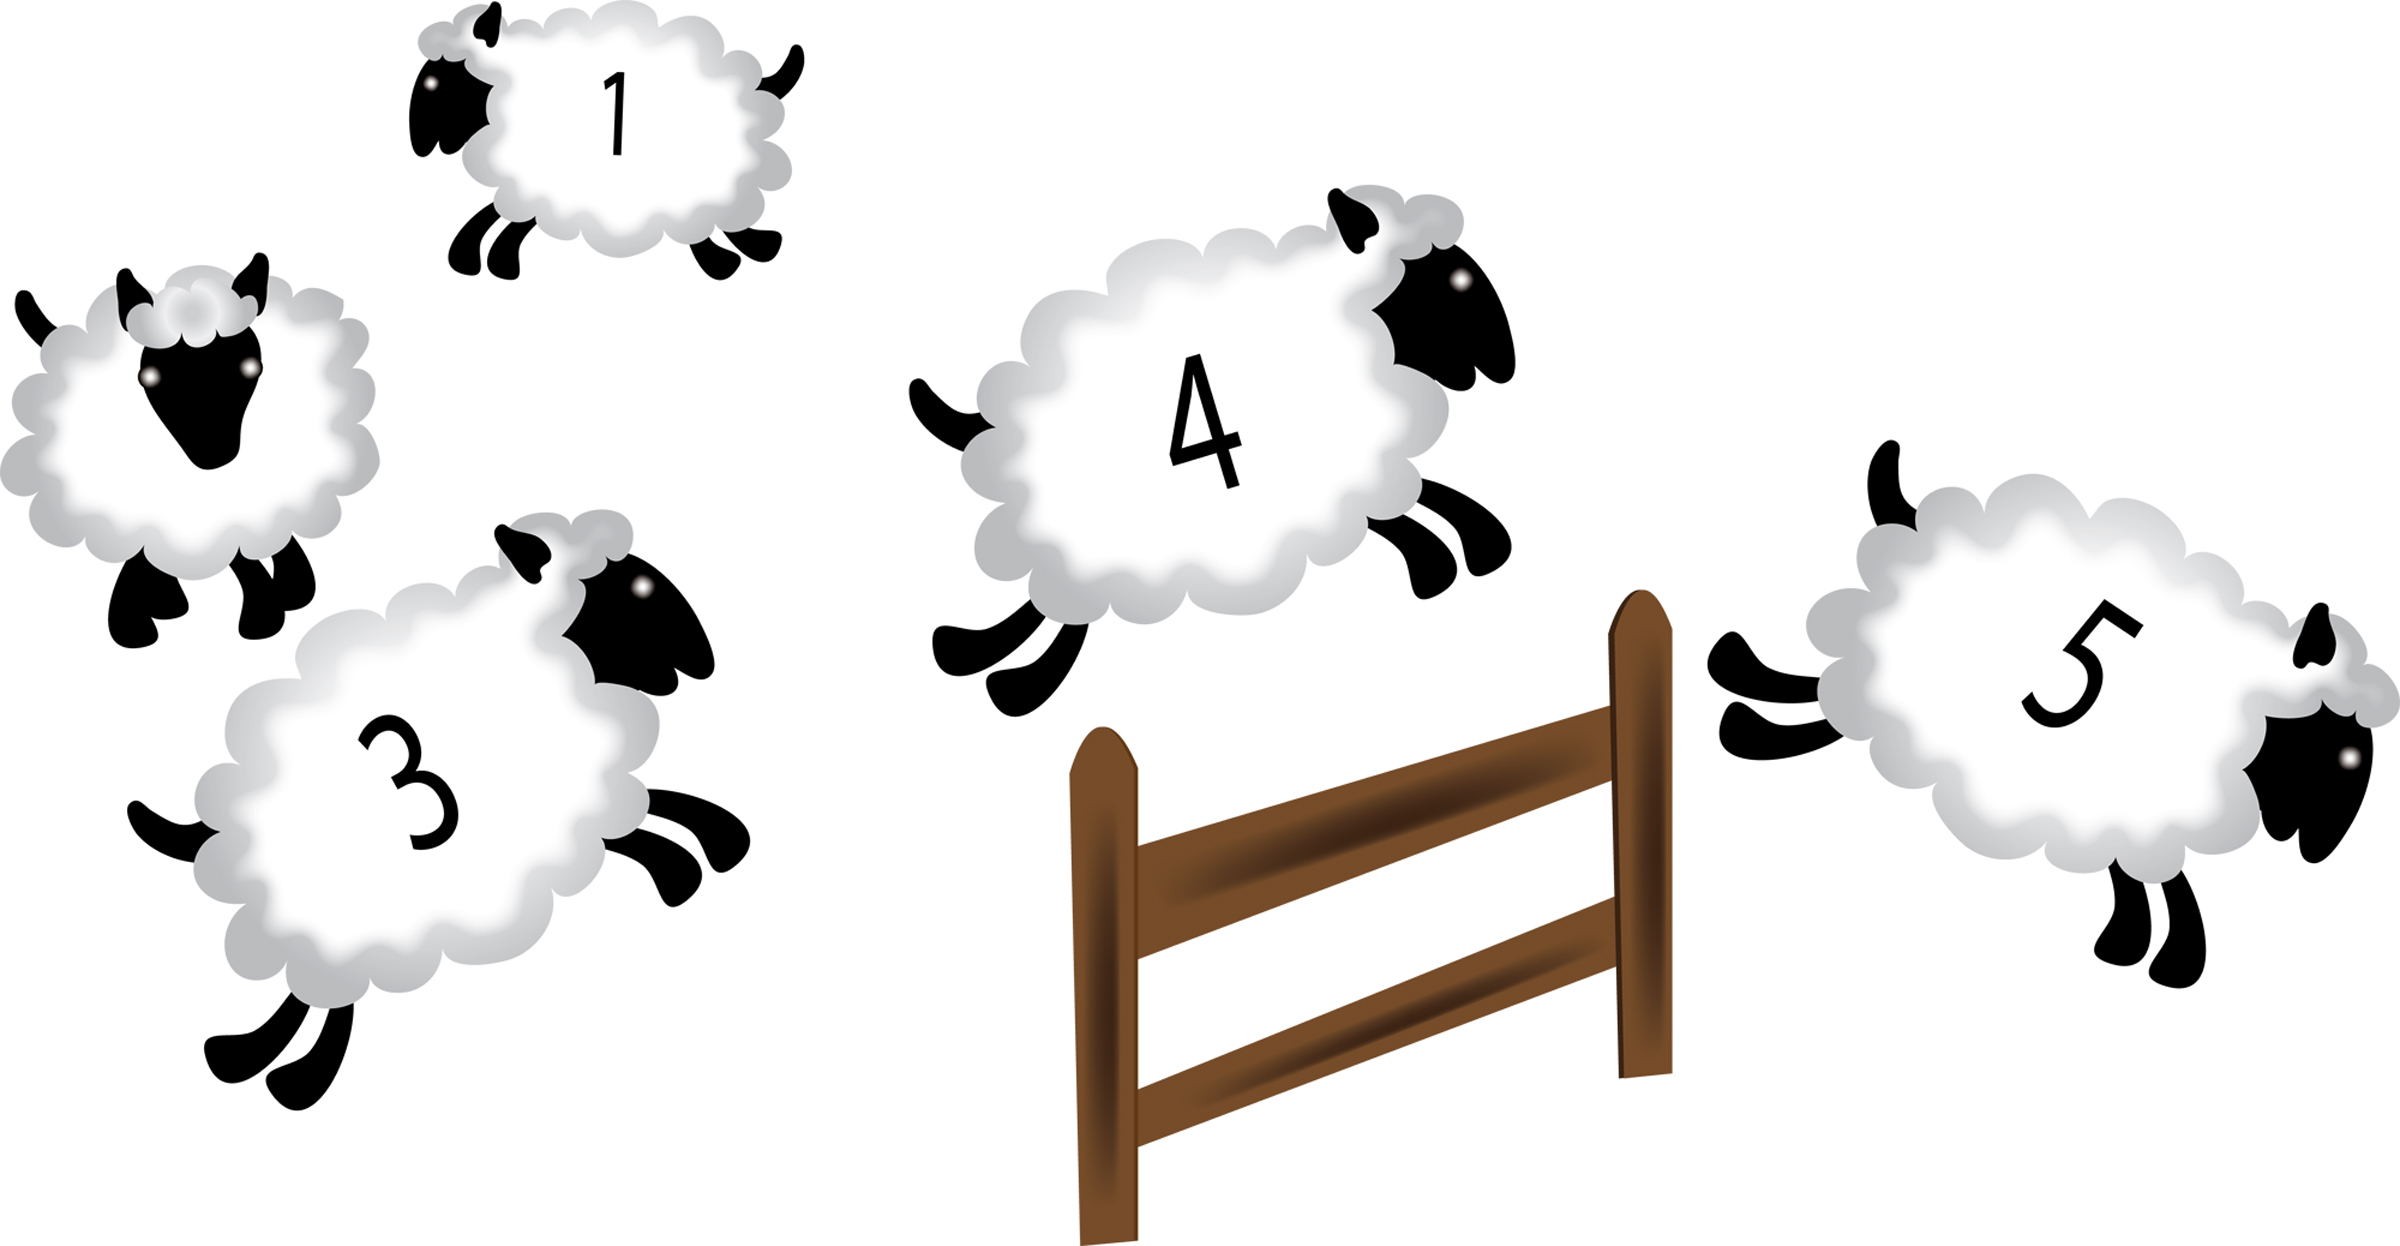 Lamb outline sheep clip art free clipart images image 2.